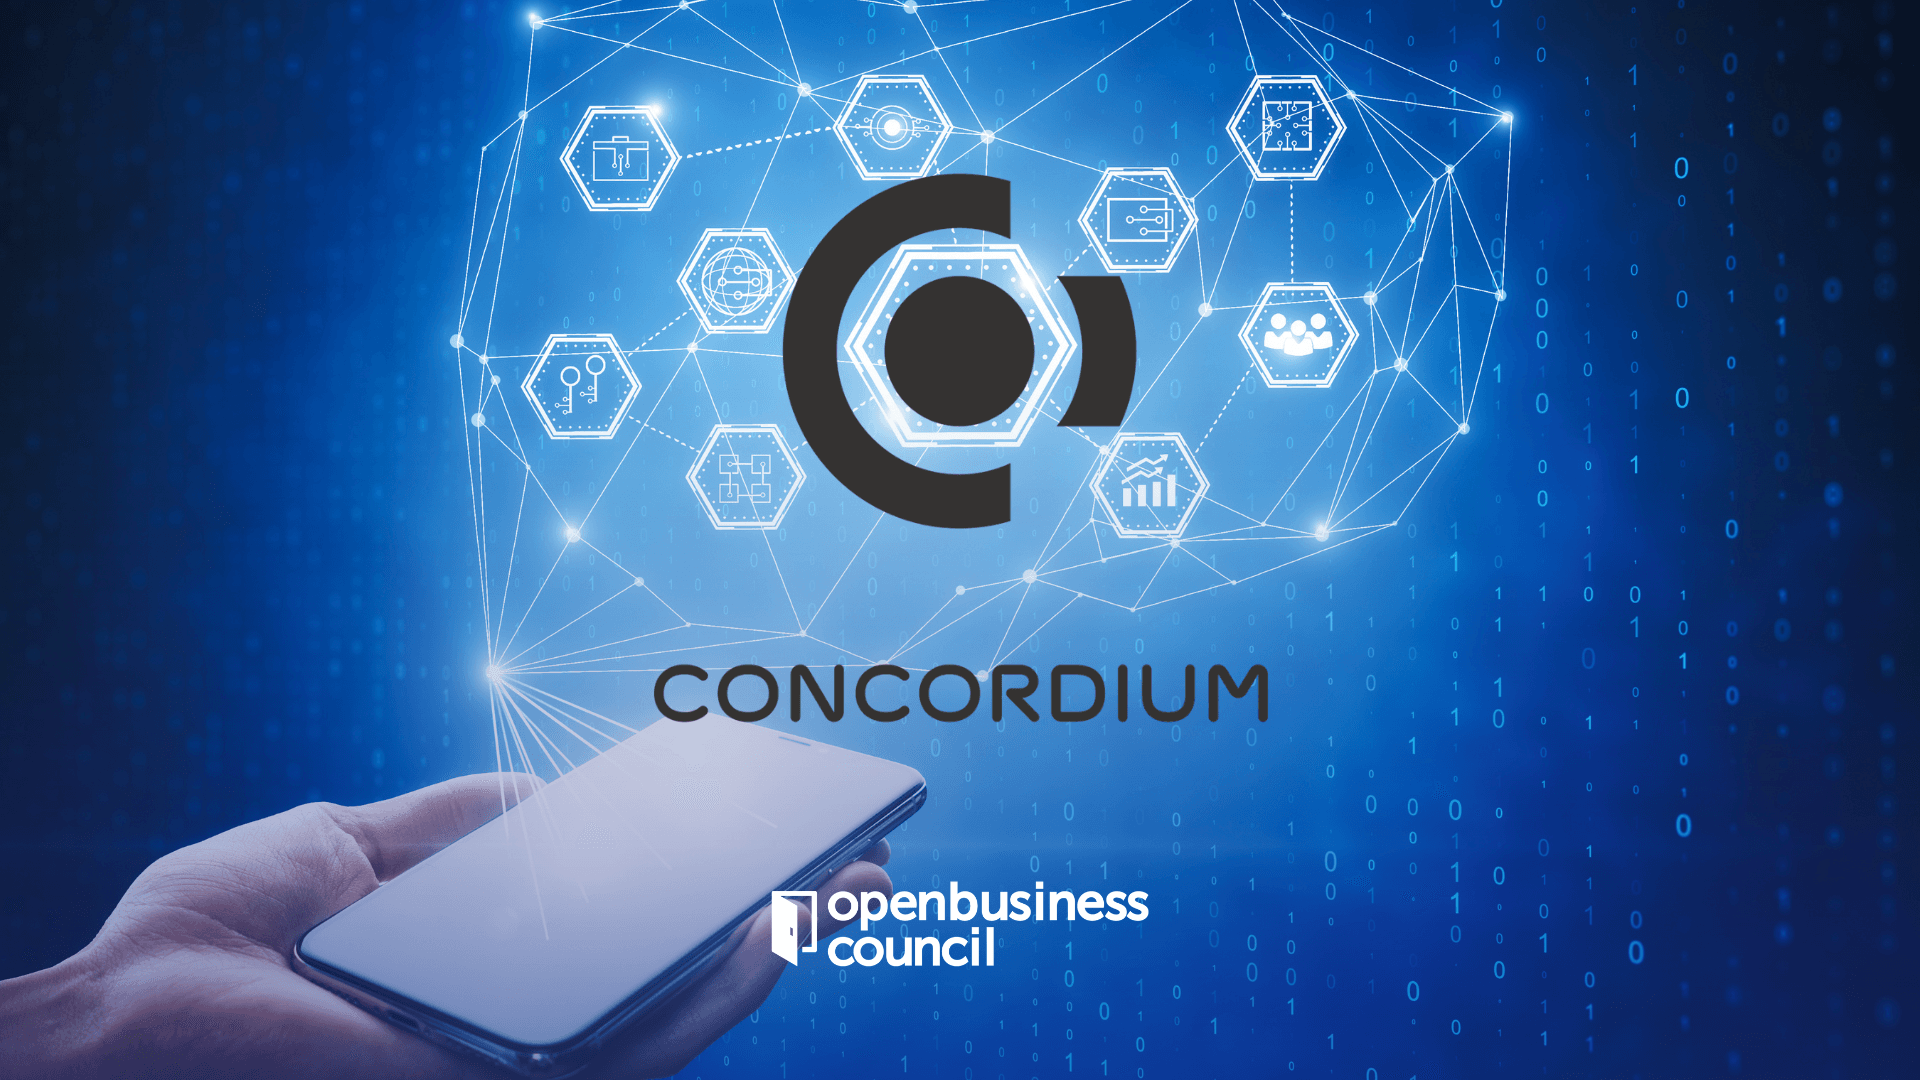 Consistent, Faster And More Transparent: ConcordiumBFT Introduces HotStuff Based Consensus Protocol